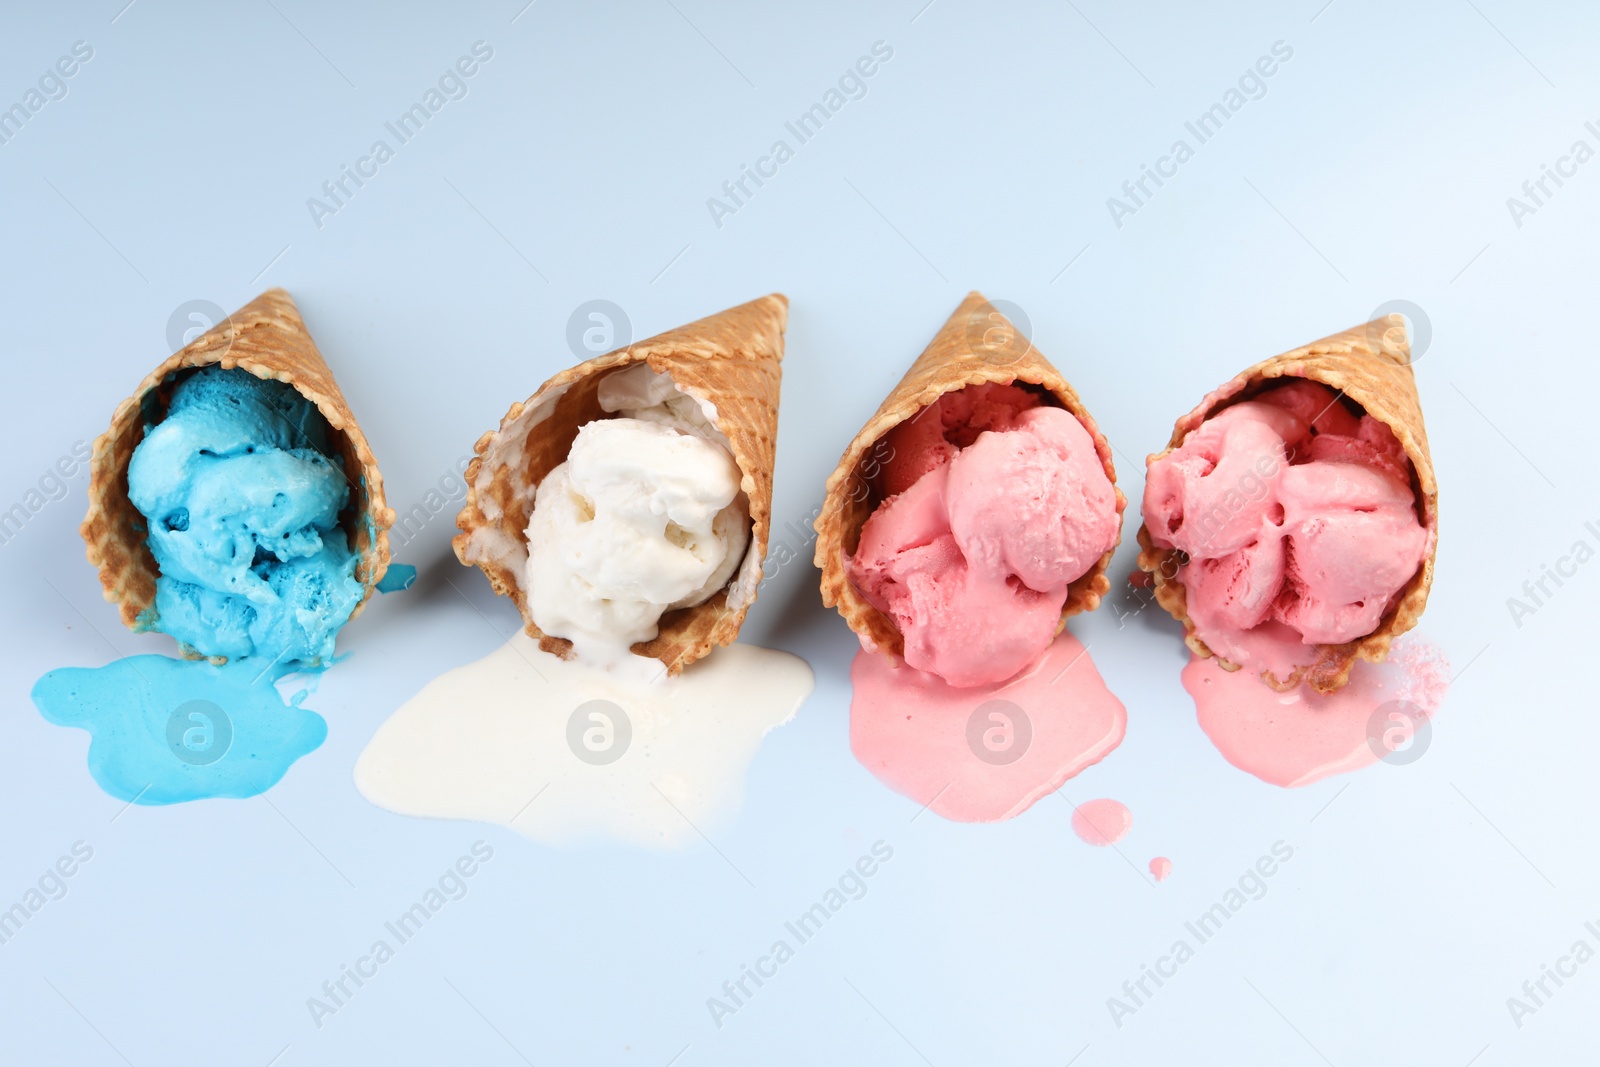 Photo of Melted ice cream in wafer cones on light blue background